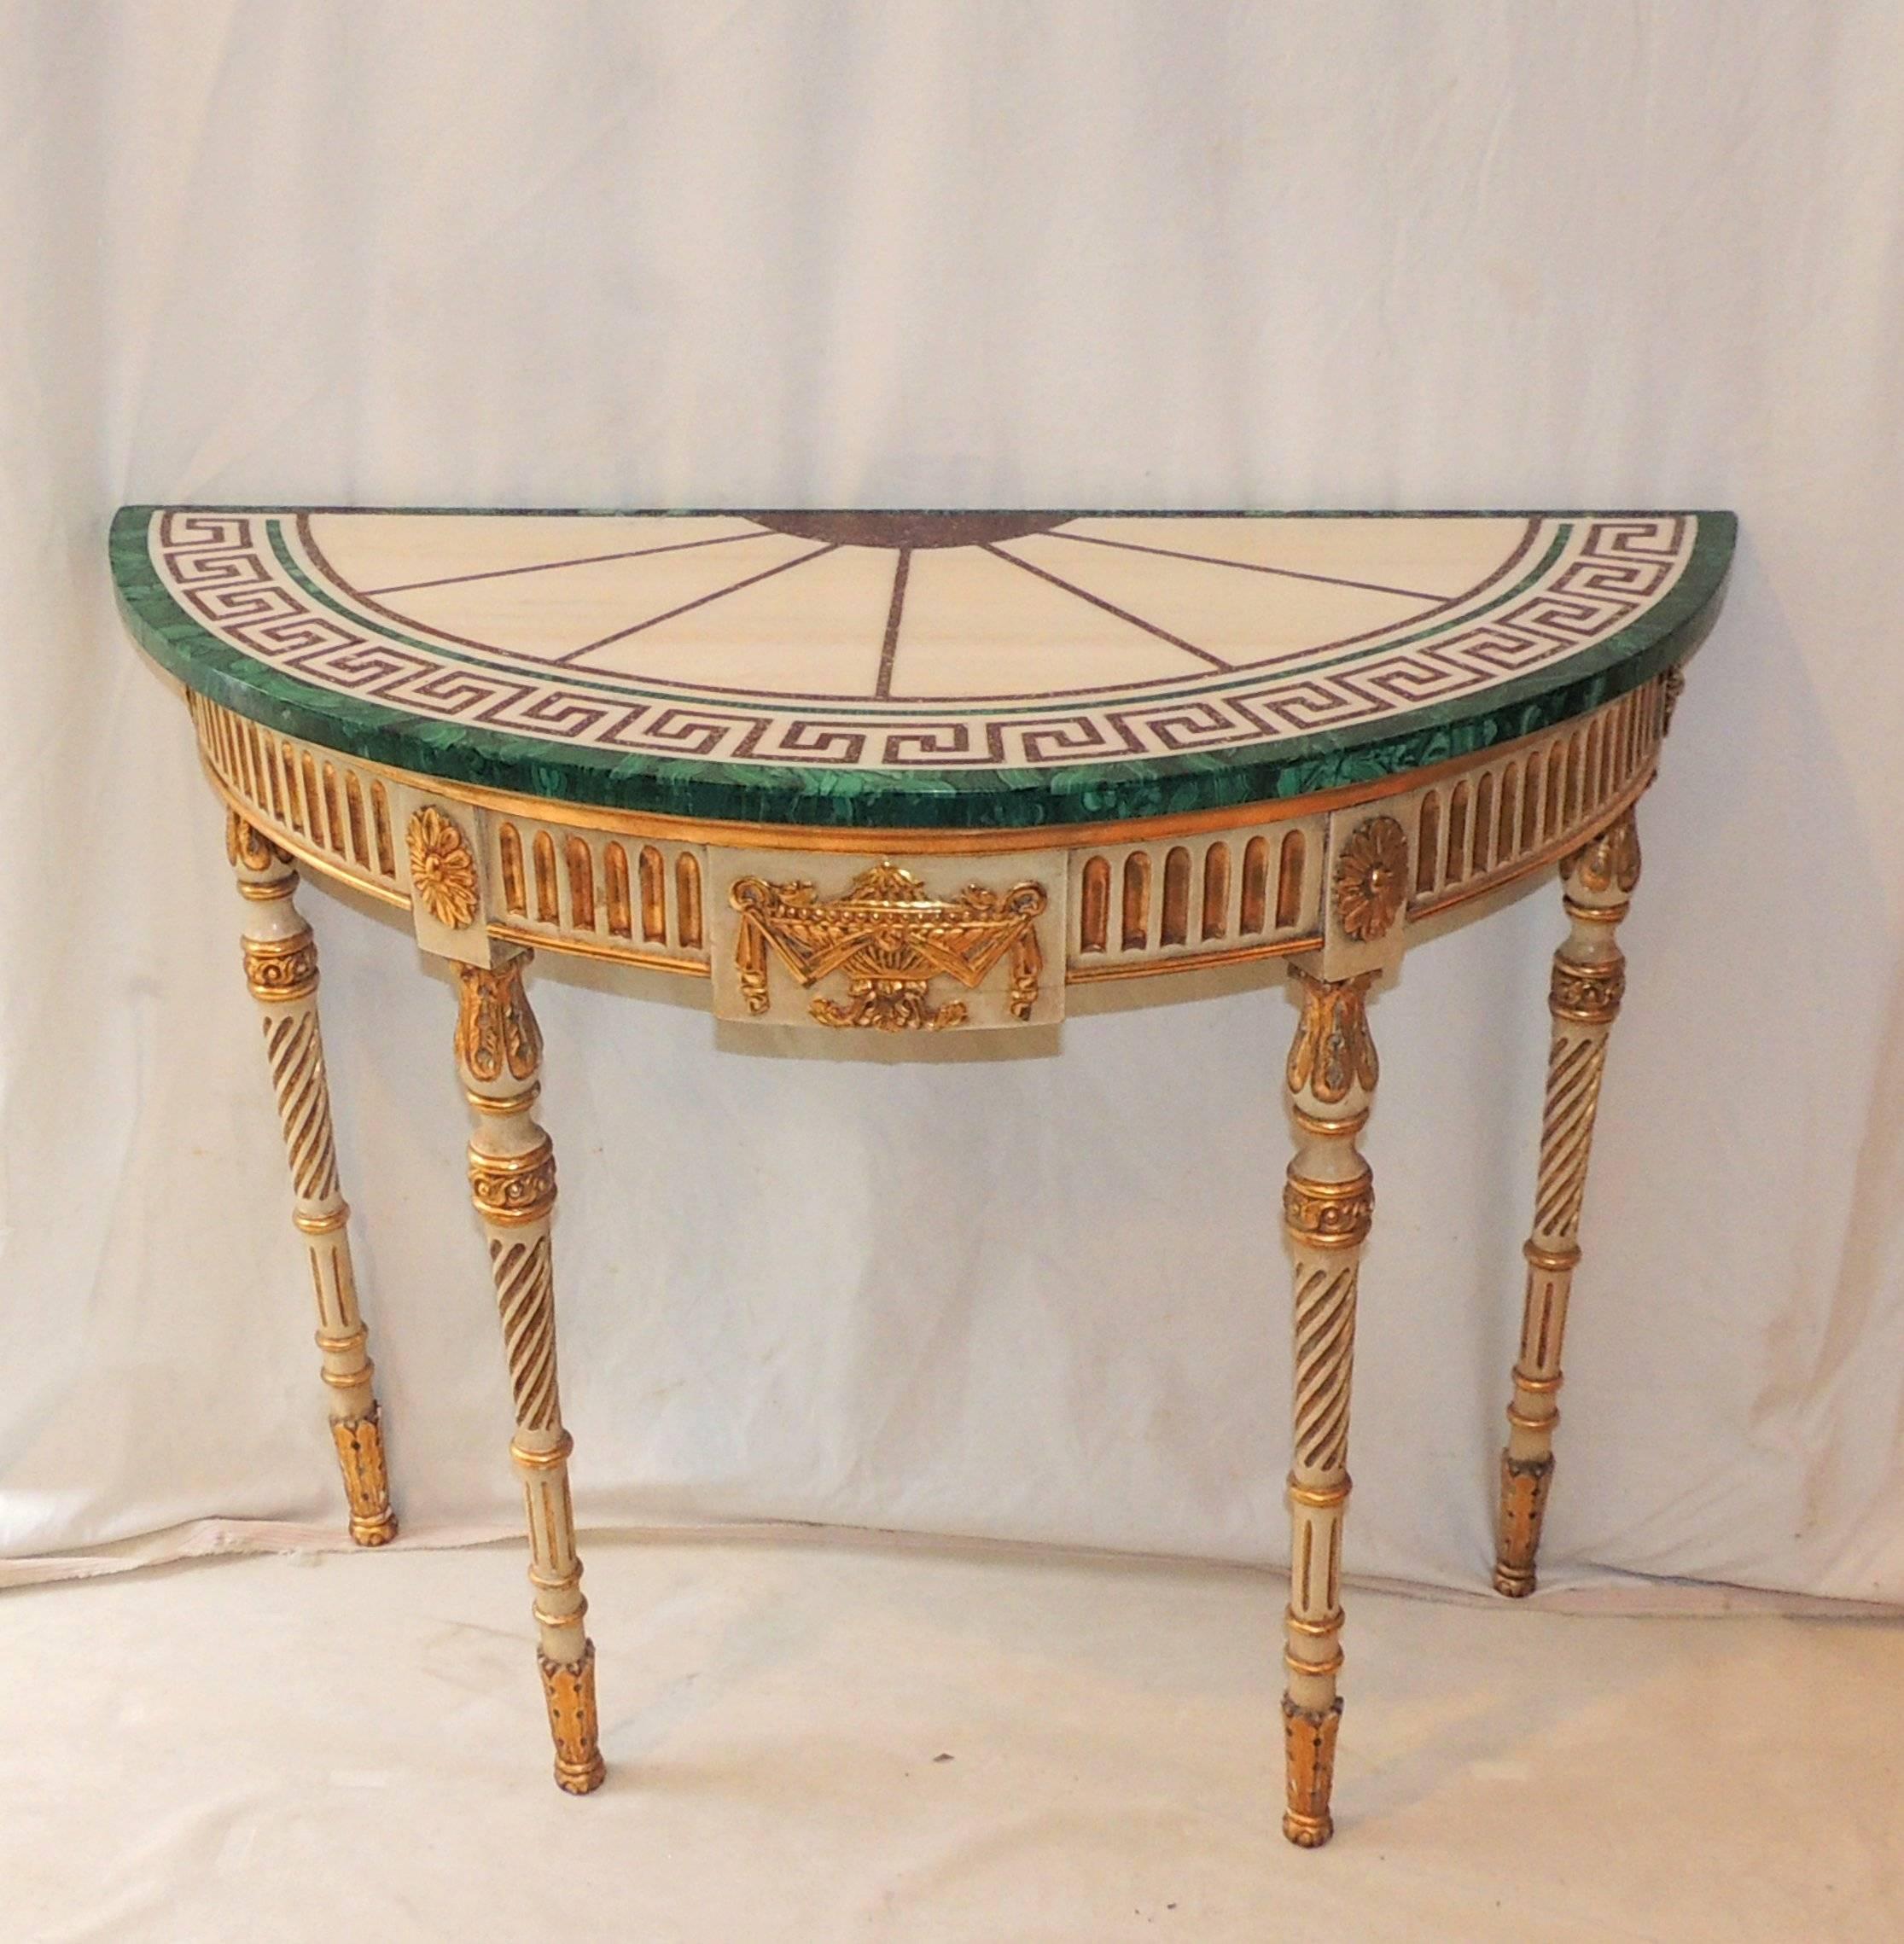 Wonderful giltwood console with marble and malachite with Greek Key design.
The giltwood table is carved with gilt centre urn and beautifully decorated carved legs.

Measures: 28